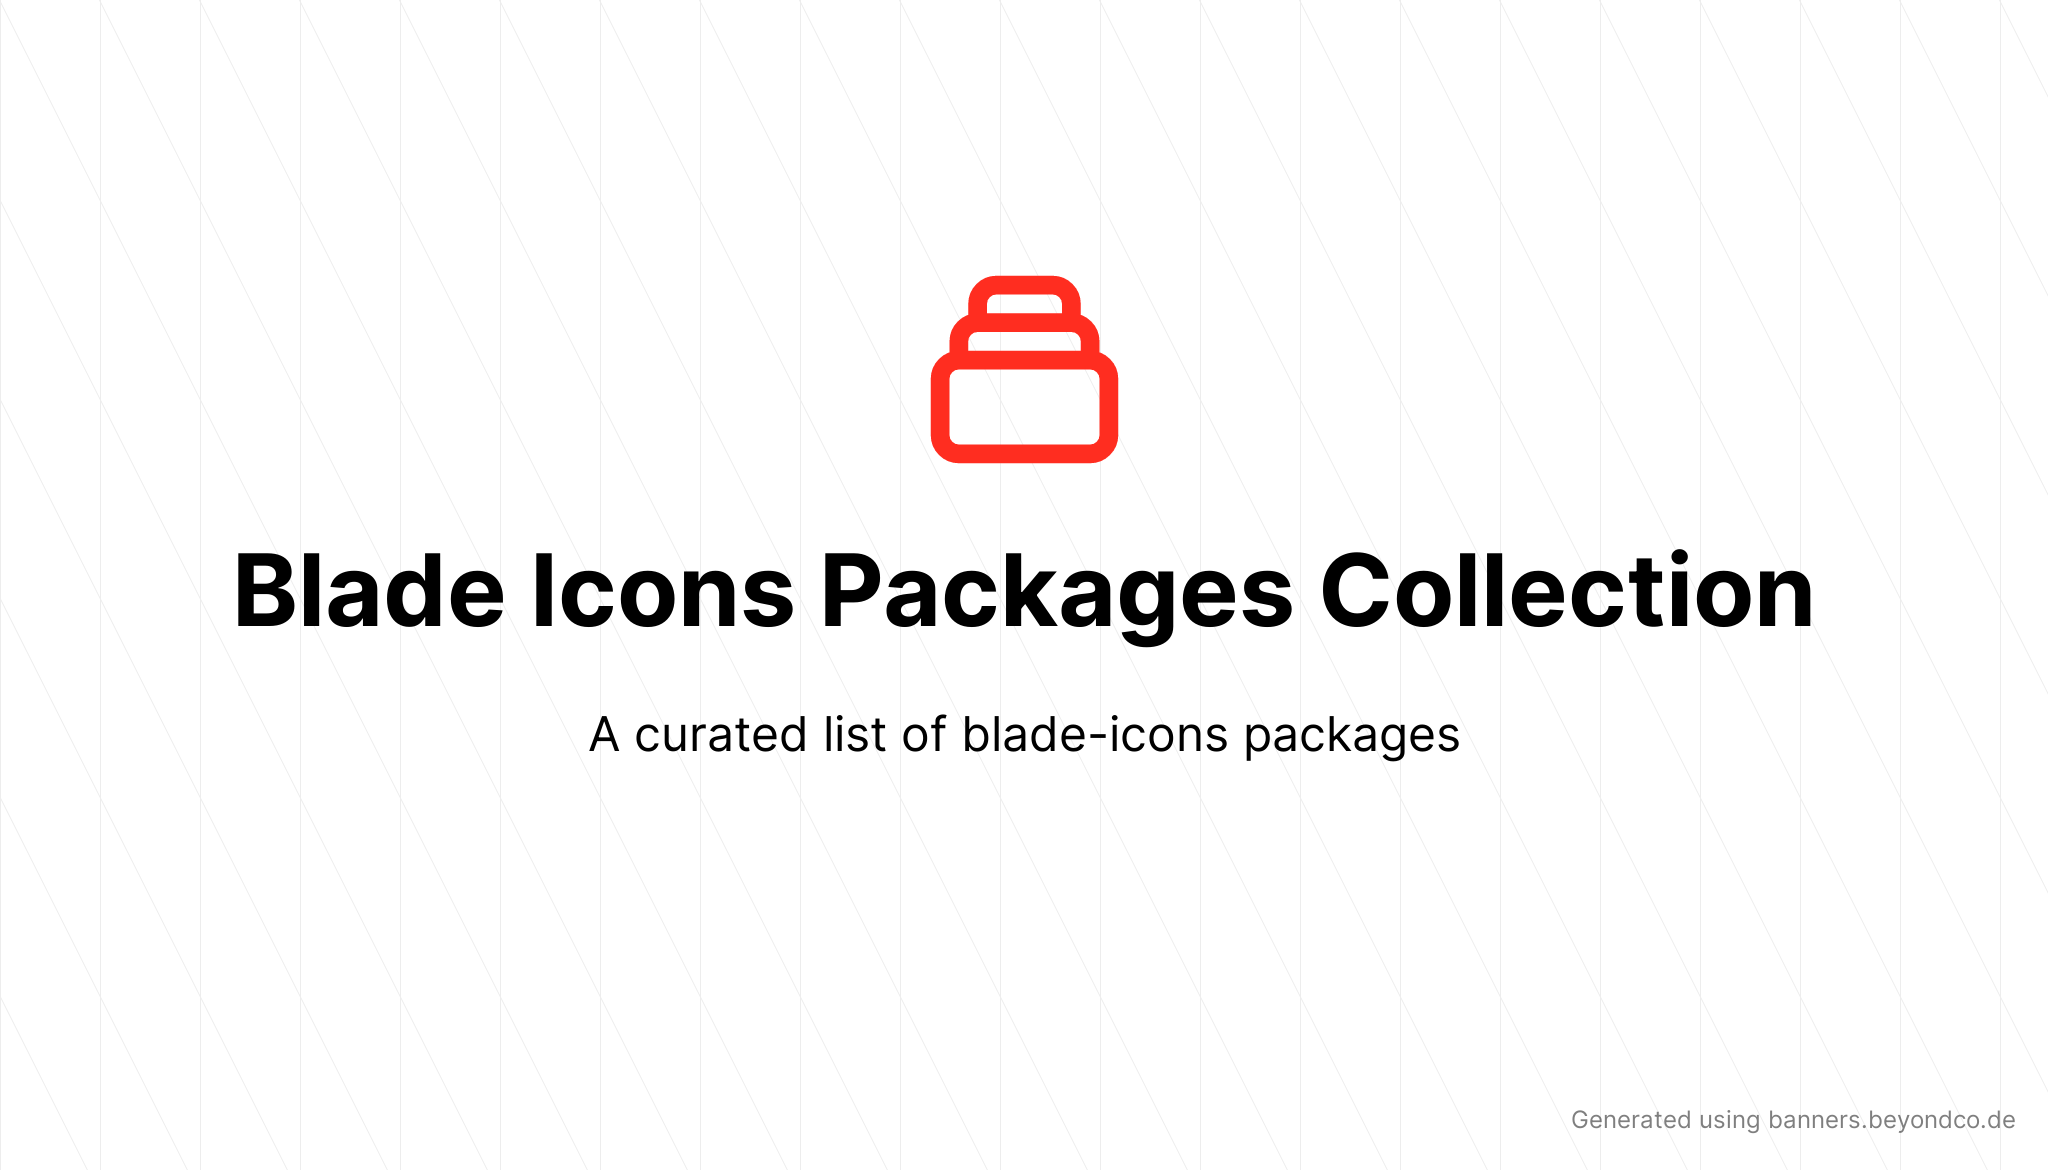 socialcard-blade-icons-packages-collection.png